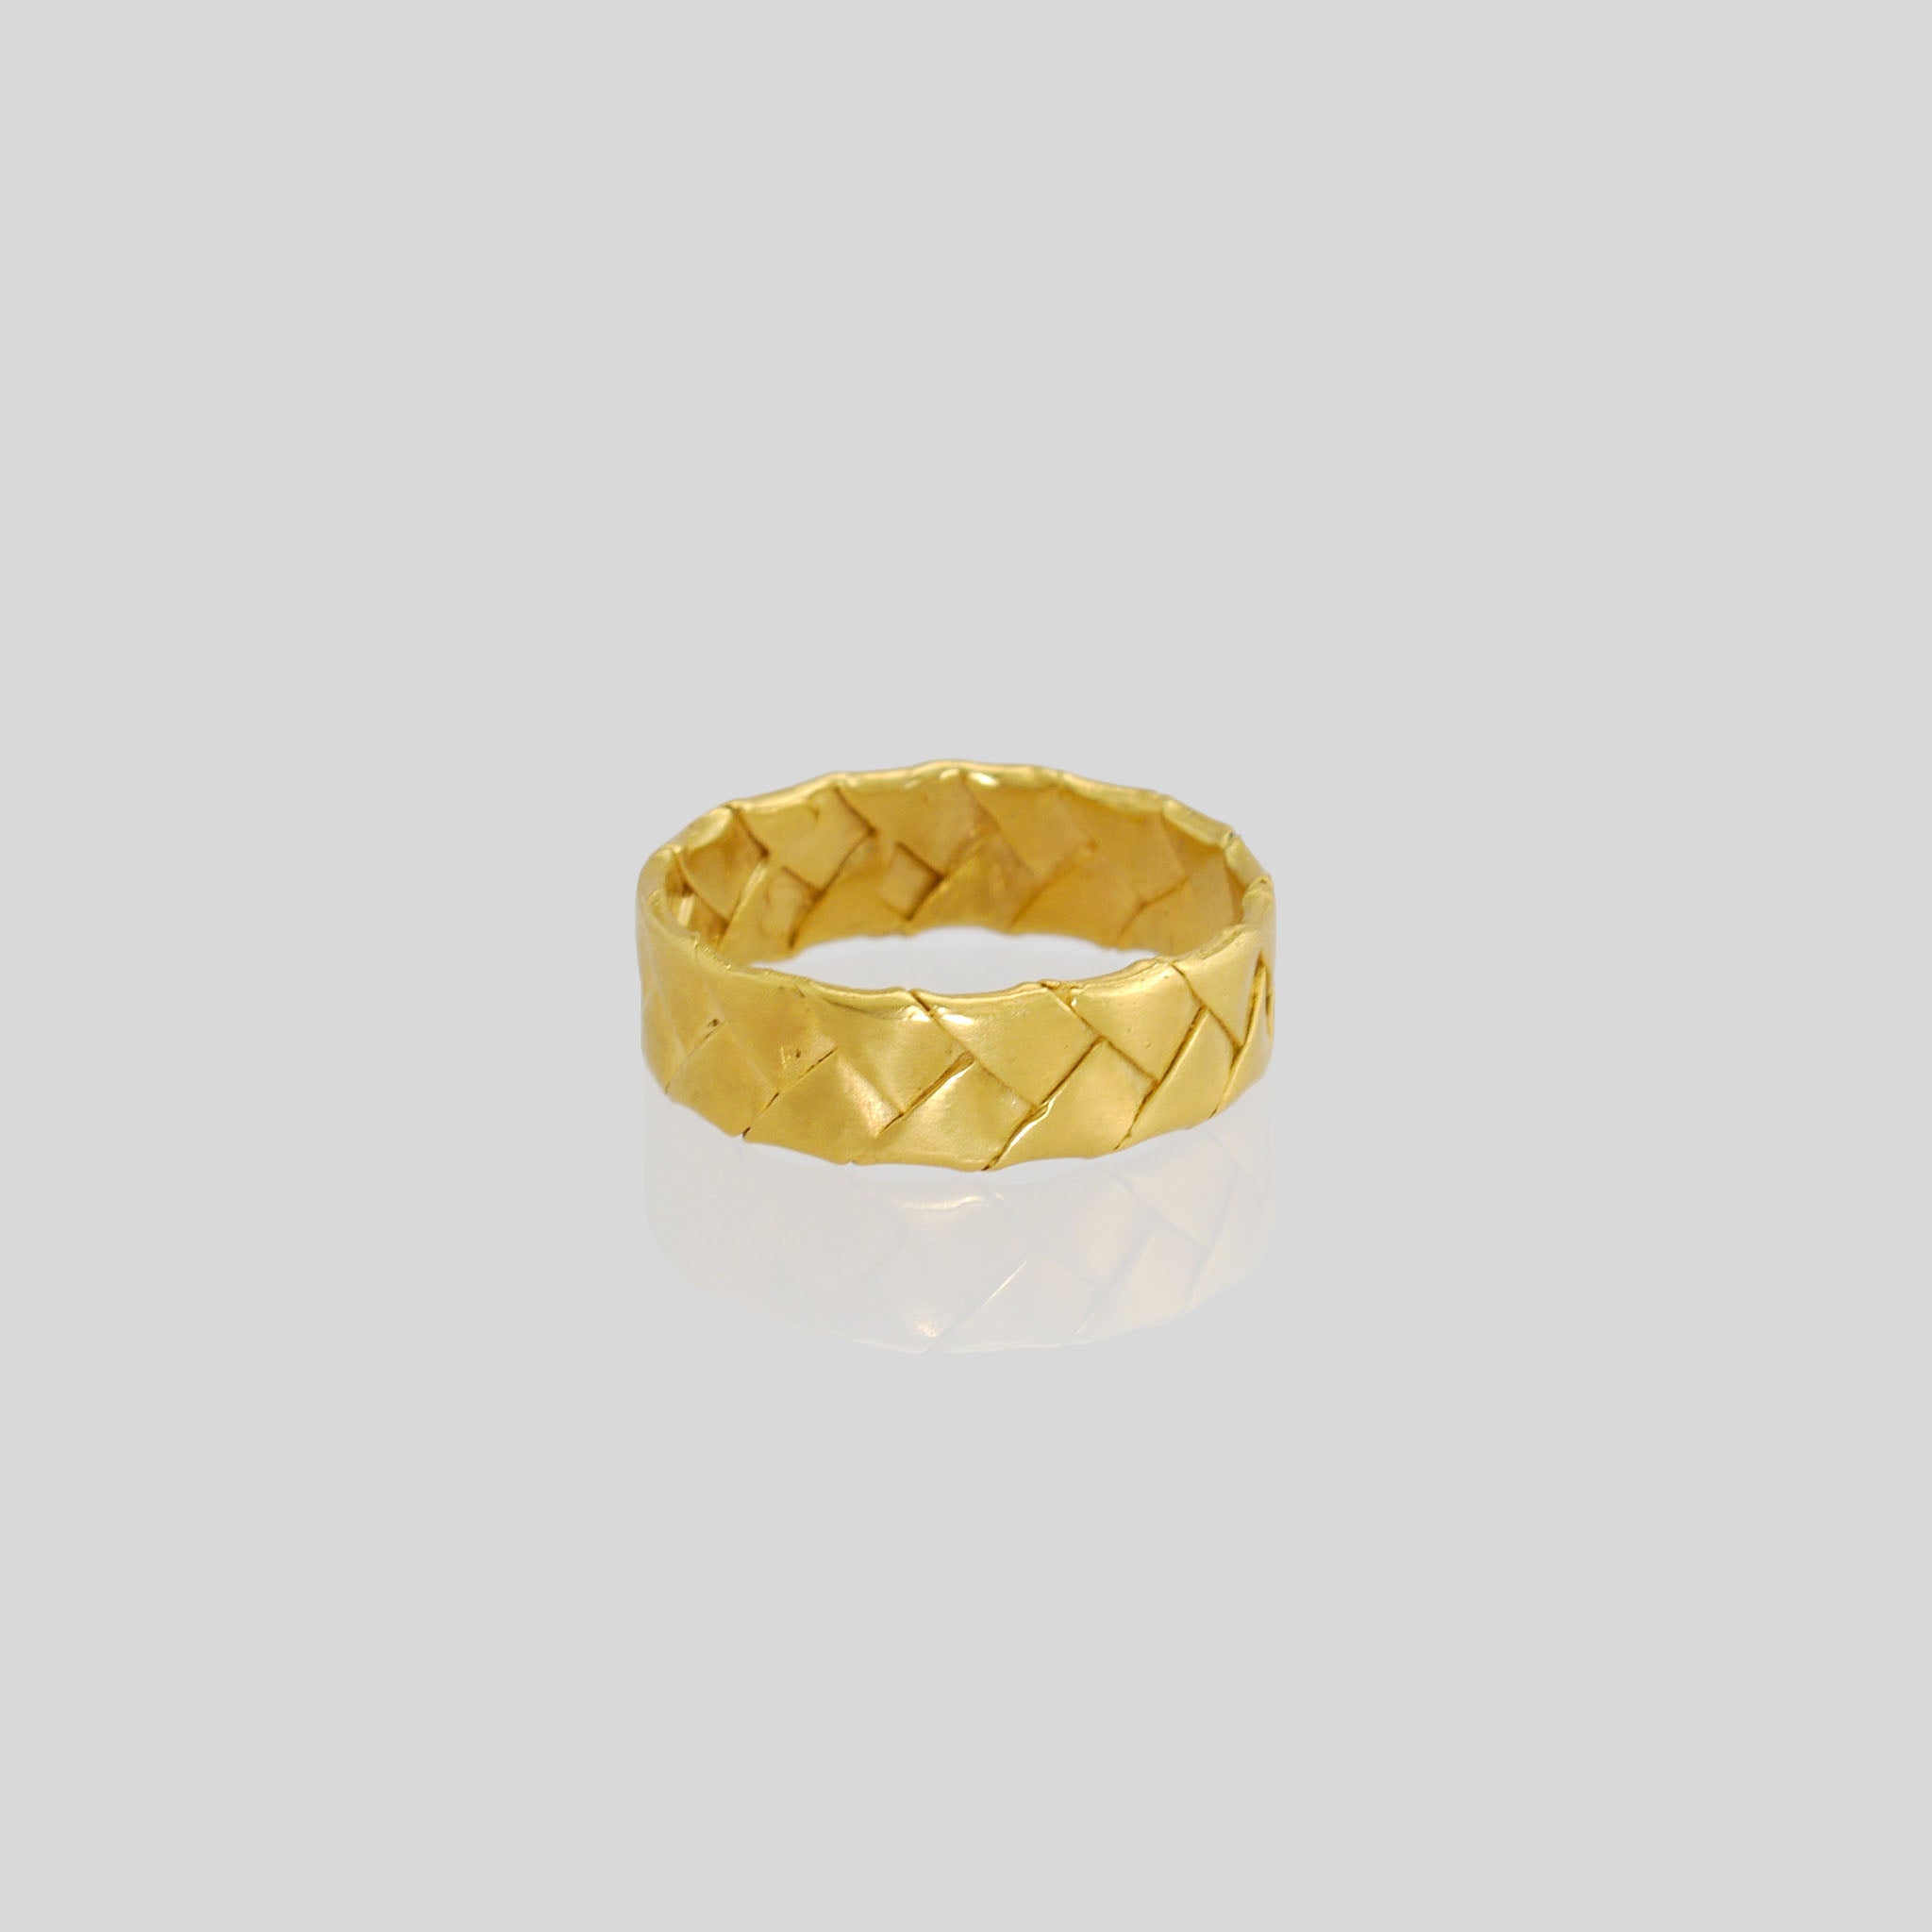 Gold Braid Ring crafted from intertwined gold strands, meticulously modeled using a unique paper processing technique. Clean, precise, and versatile, suitable for daily wear.